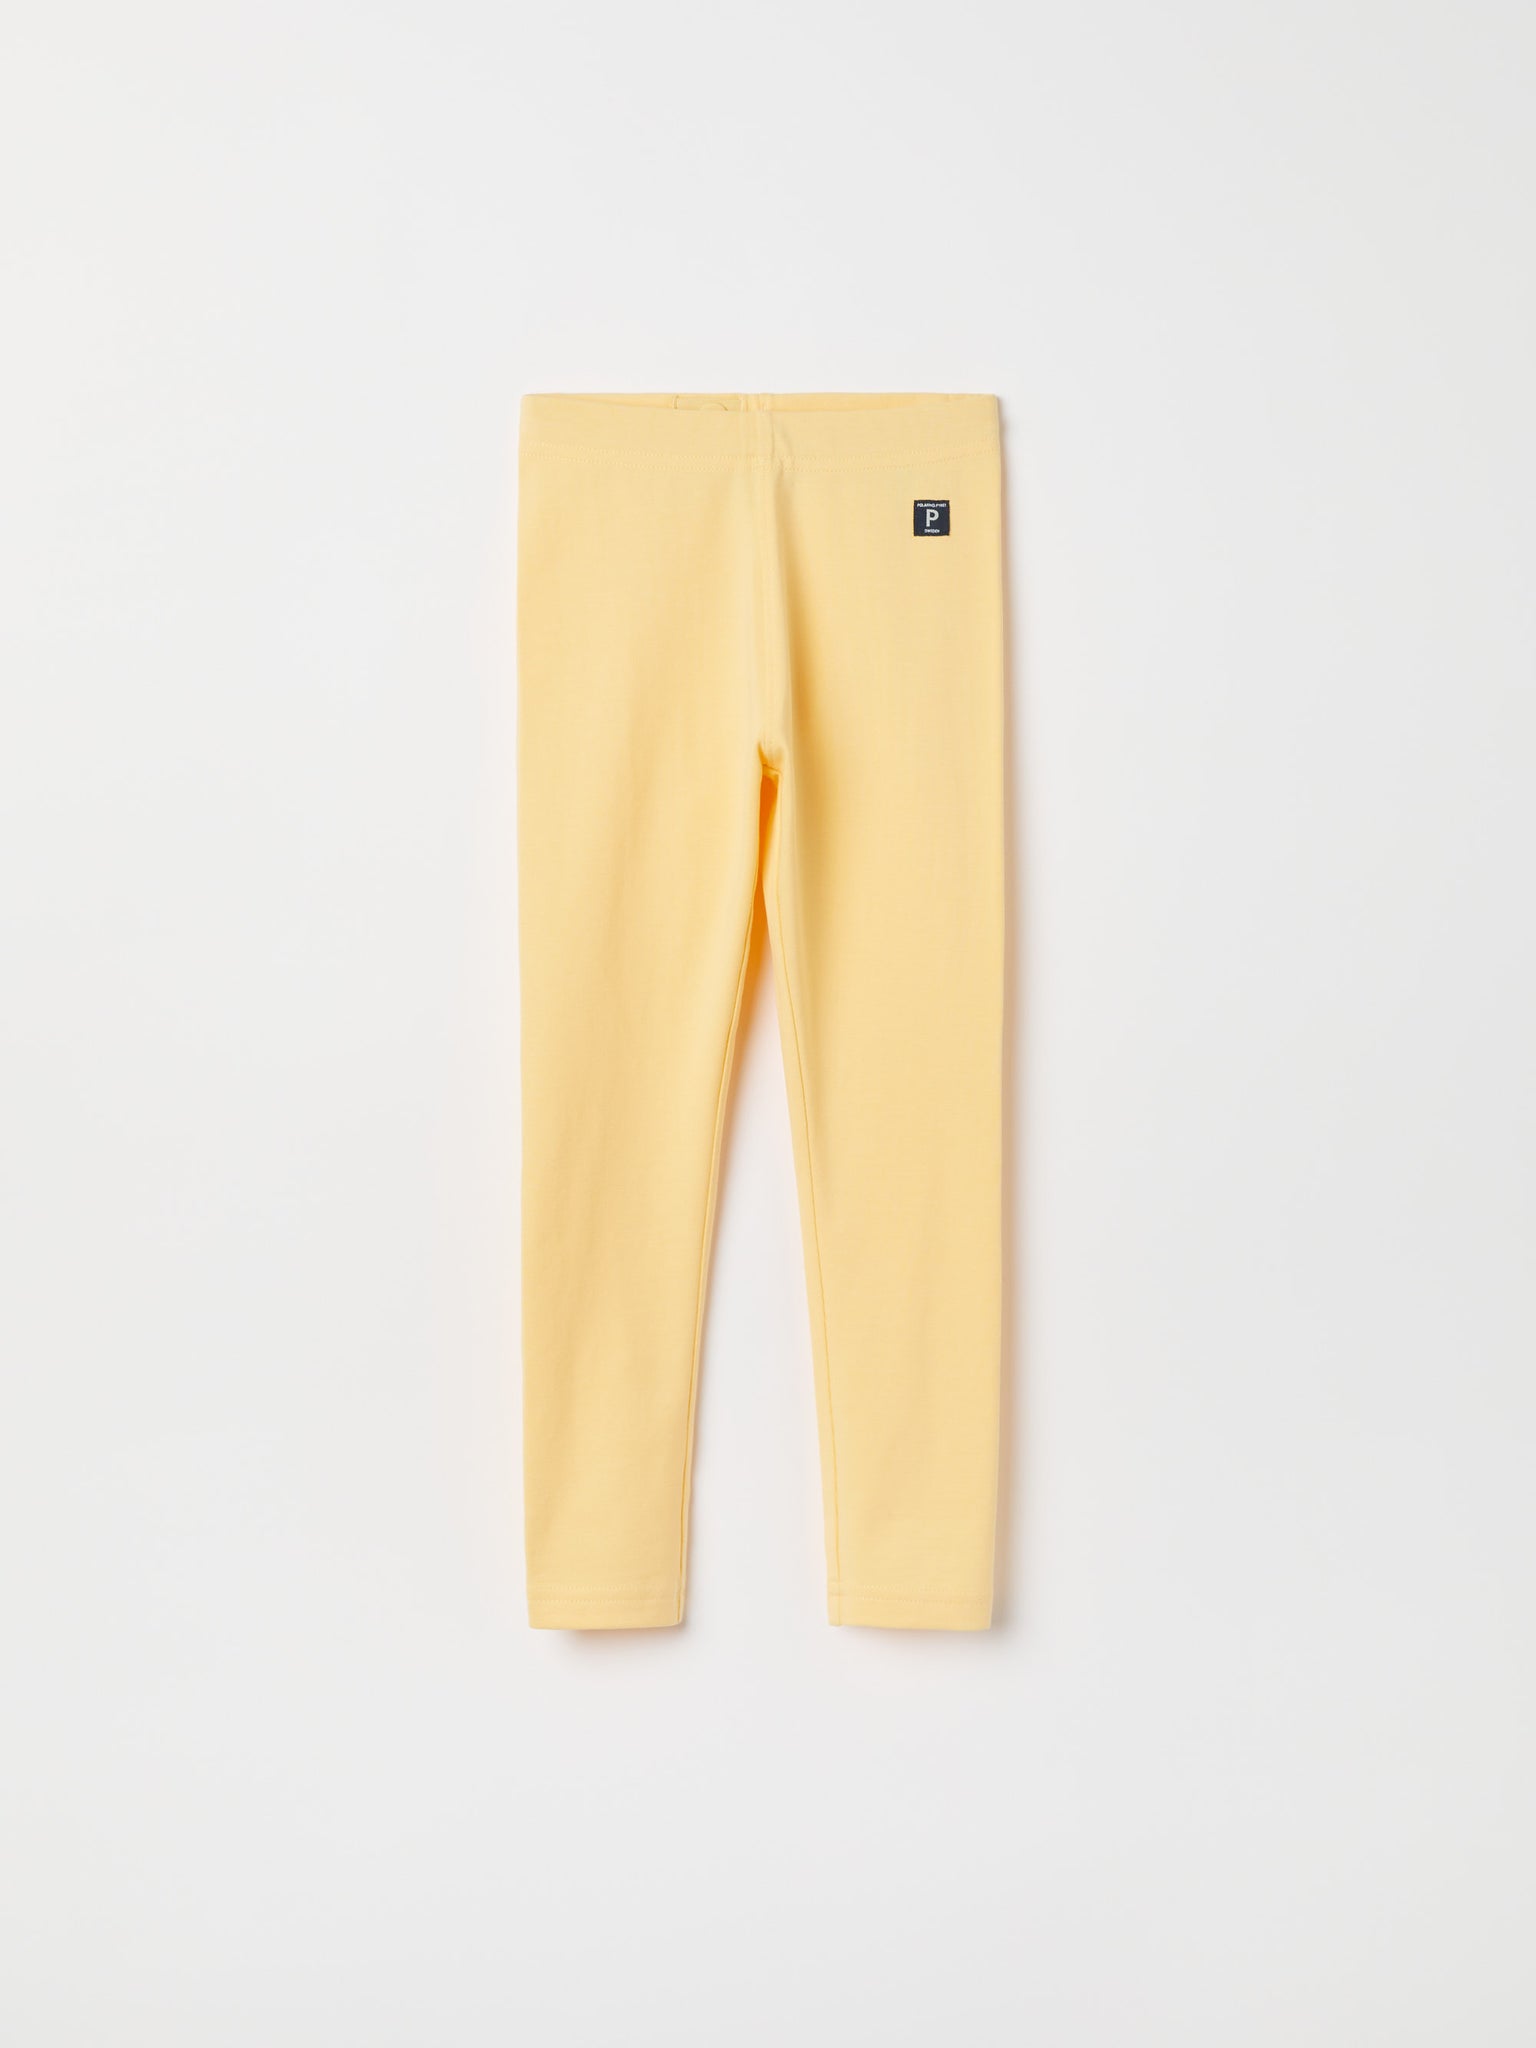 Yellow Kids Leggings from the Polarn O. Pyret kidswear collection. Nordic kids clothes made from sustainable sources.